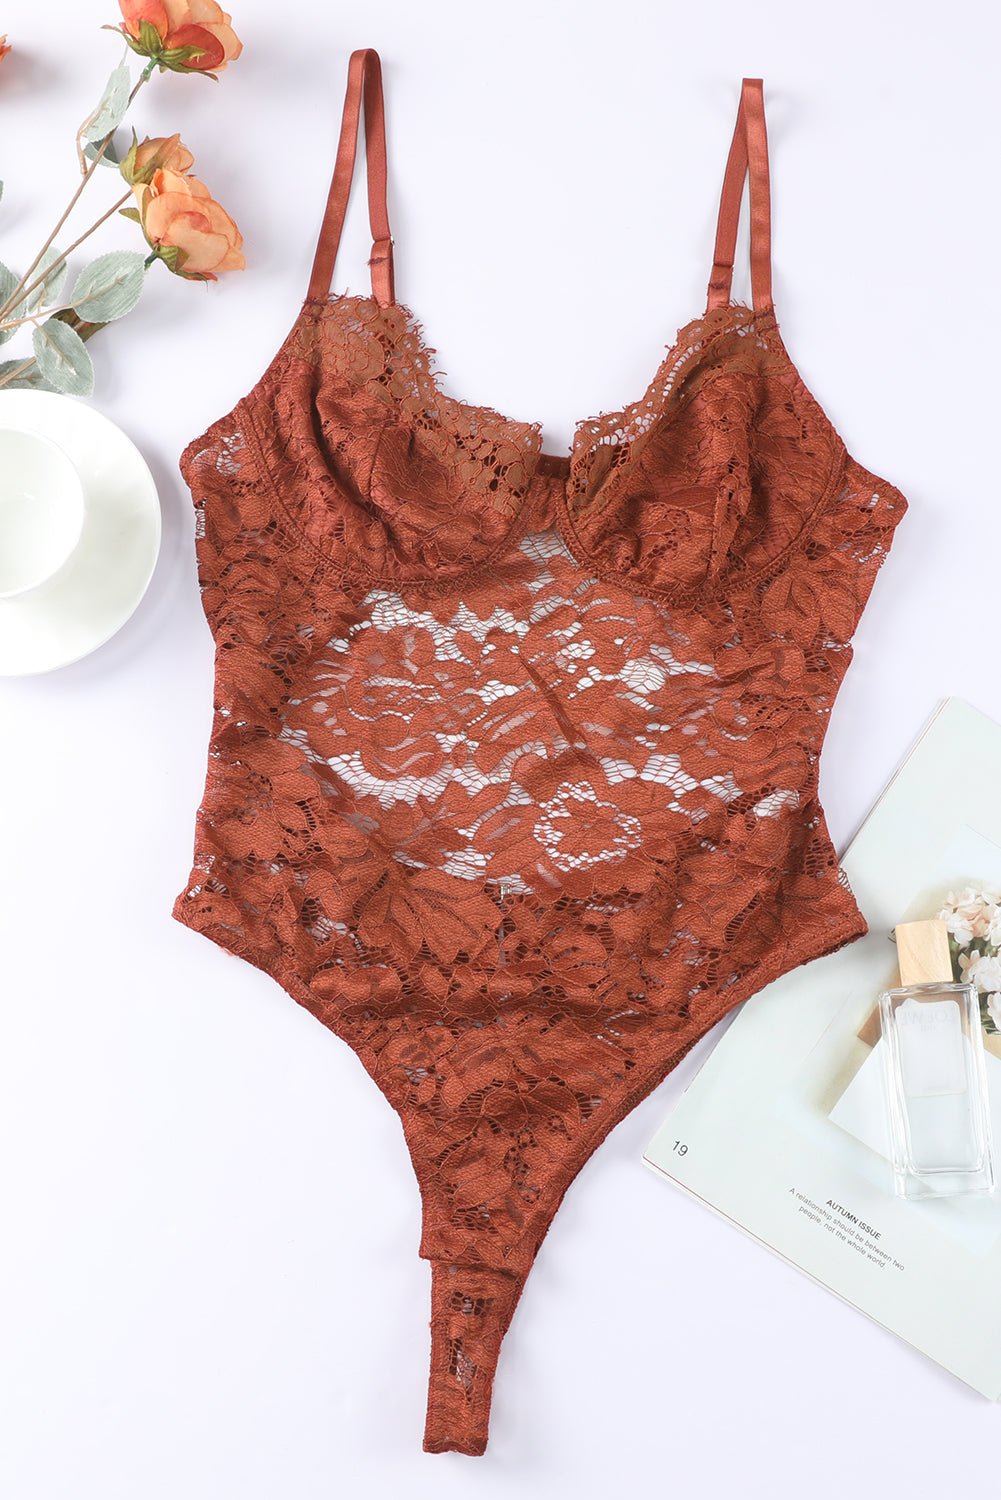 Enchantress Lace Bodysuit - Embrace Your Inner Goddess and Captivate Hearts with Divine Elegance and Comfort. - Guy Christopher